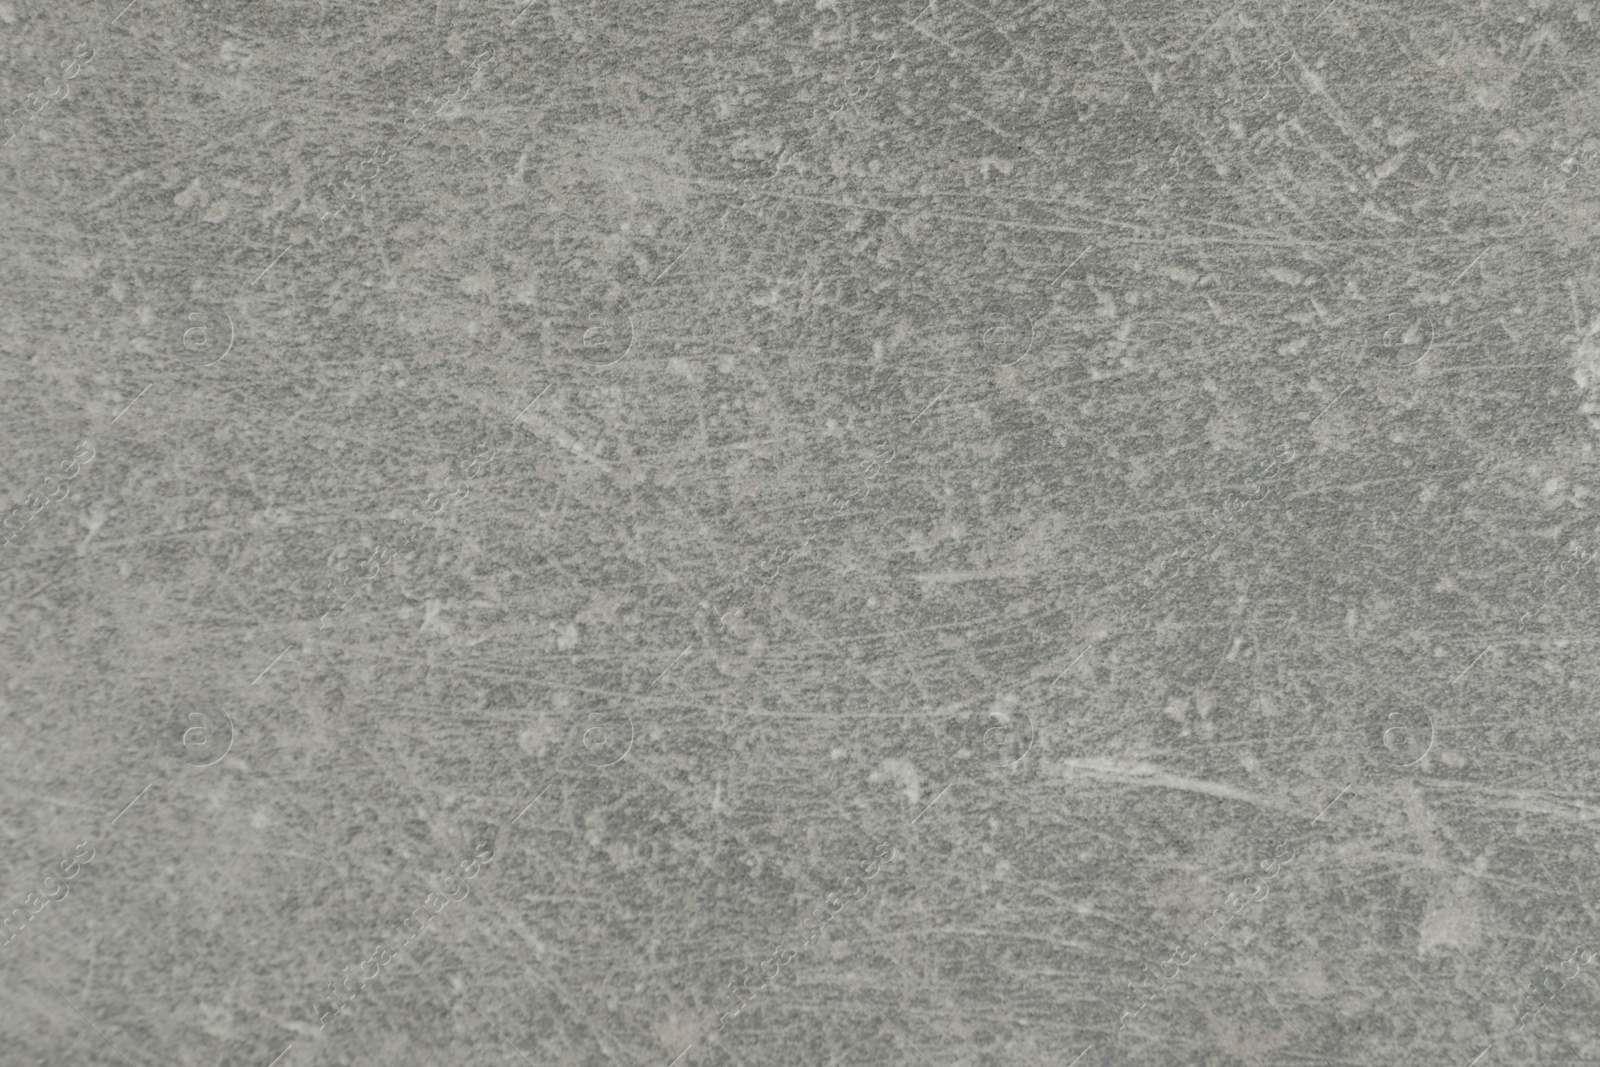 Photo of Texture of light grey stone surface as background, closeup